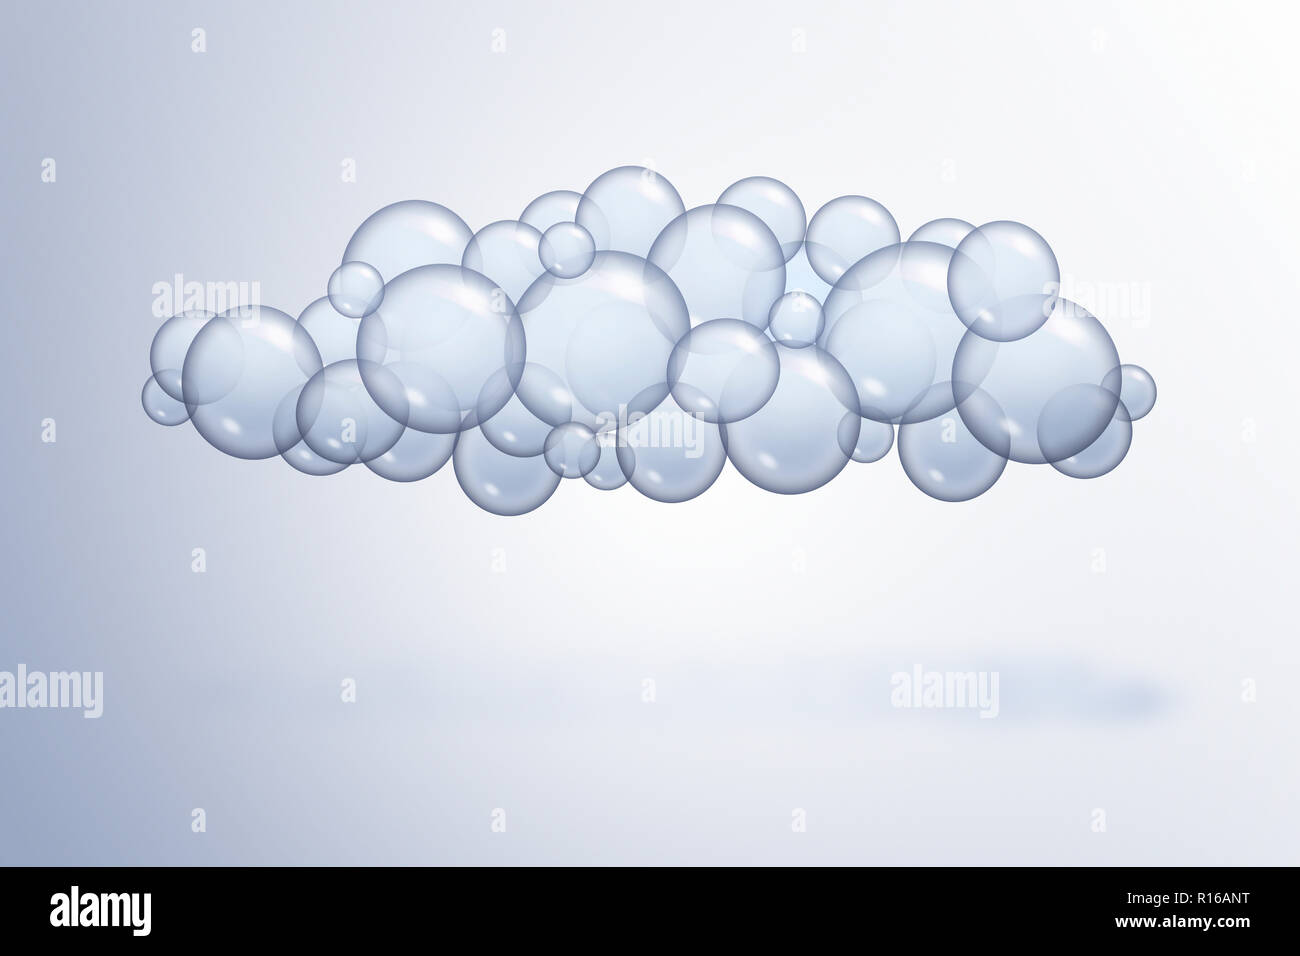 Grey bubbles connecting together to form cloud shape, high key digital image Stock Photo